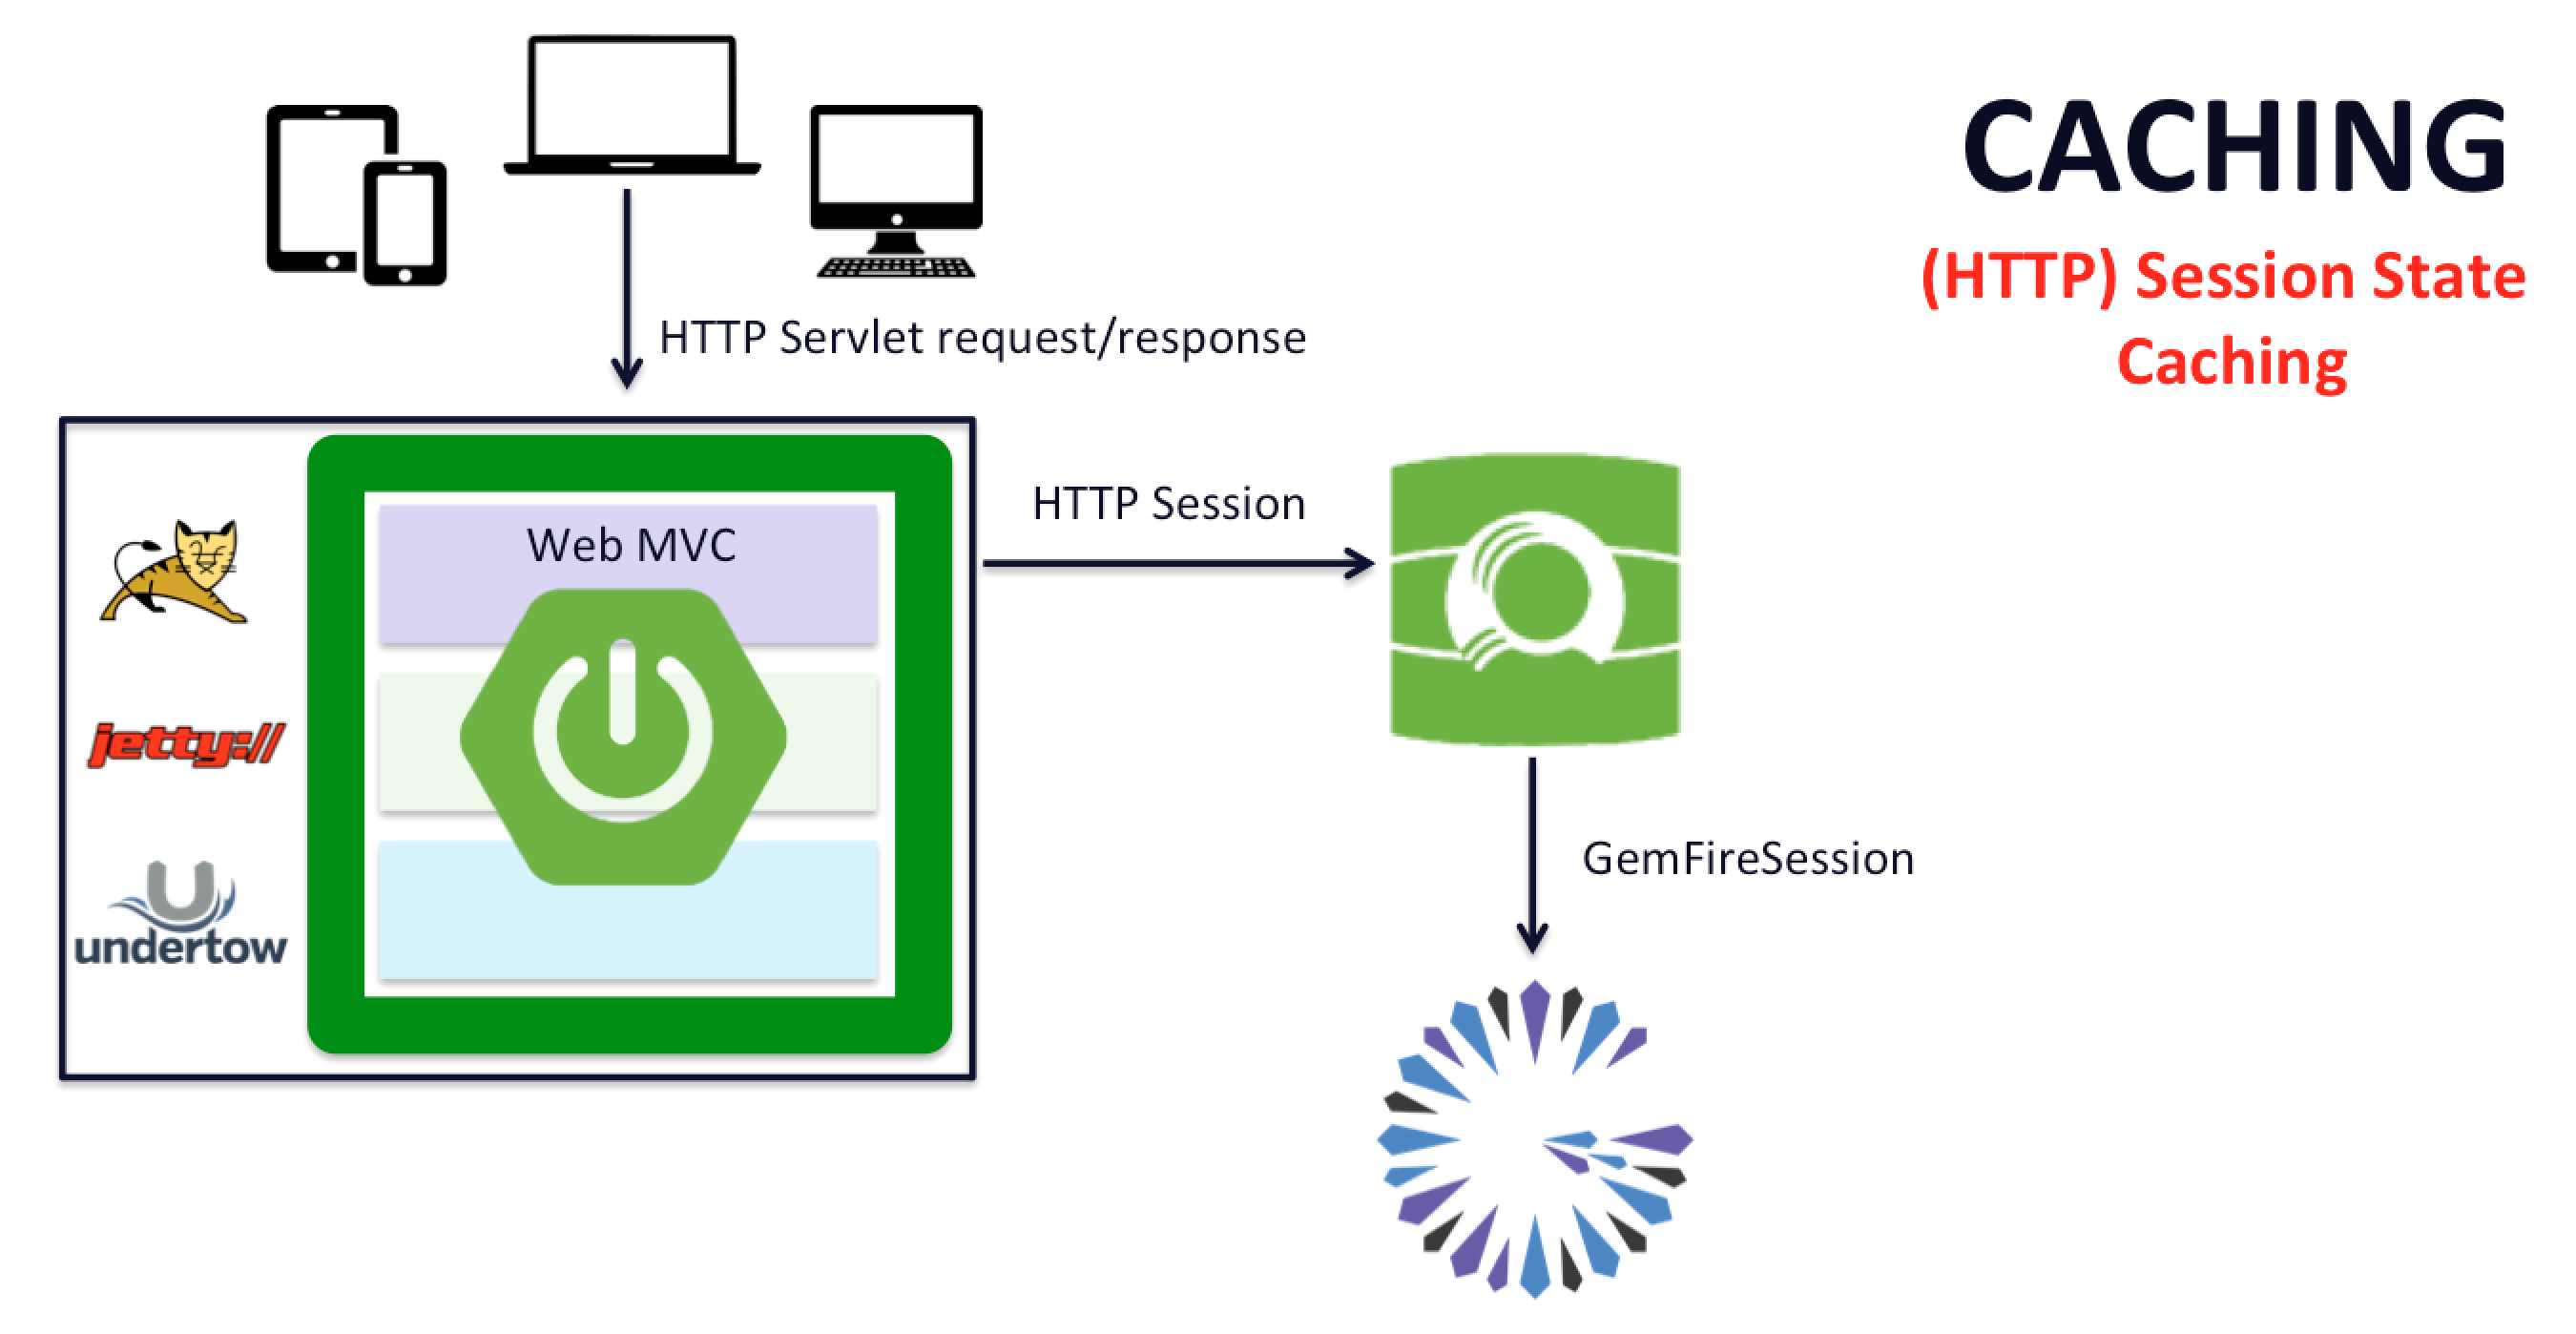 HTTP Session Caching